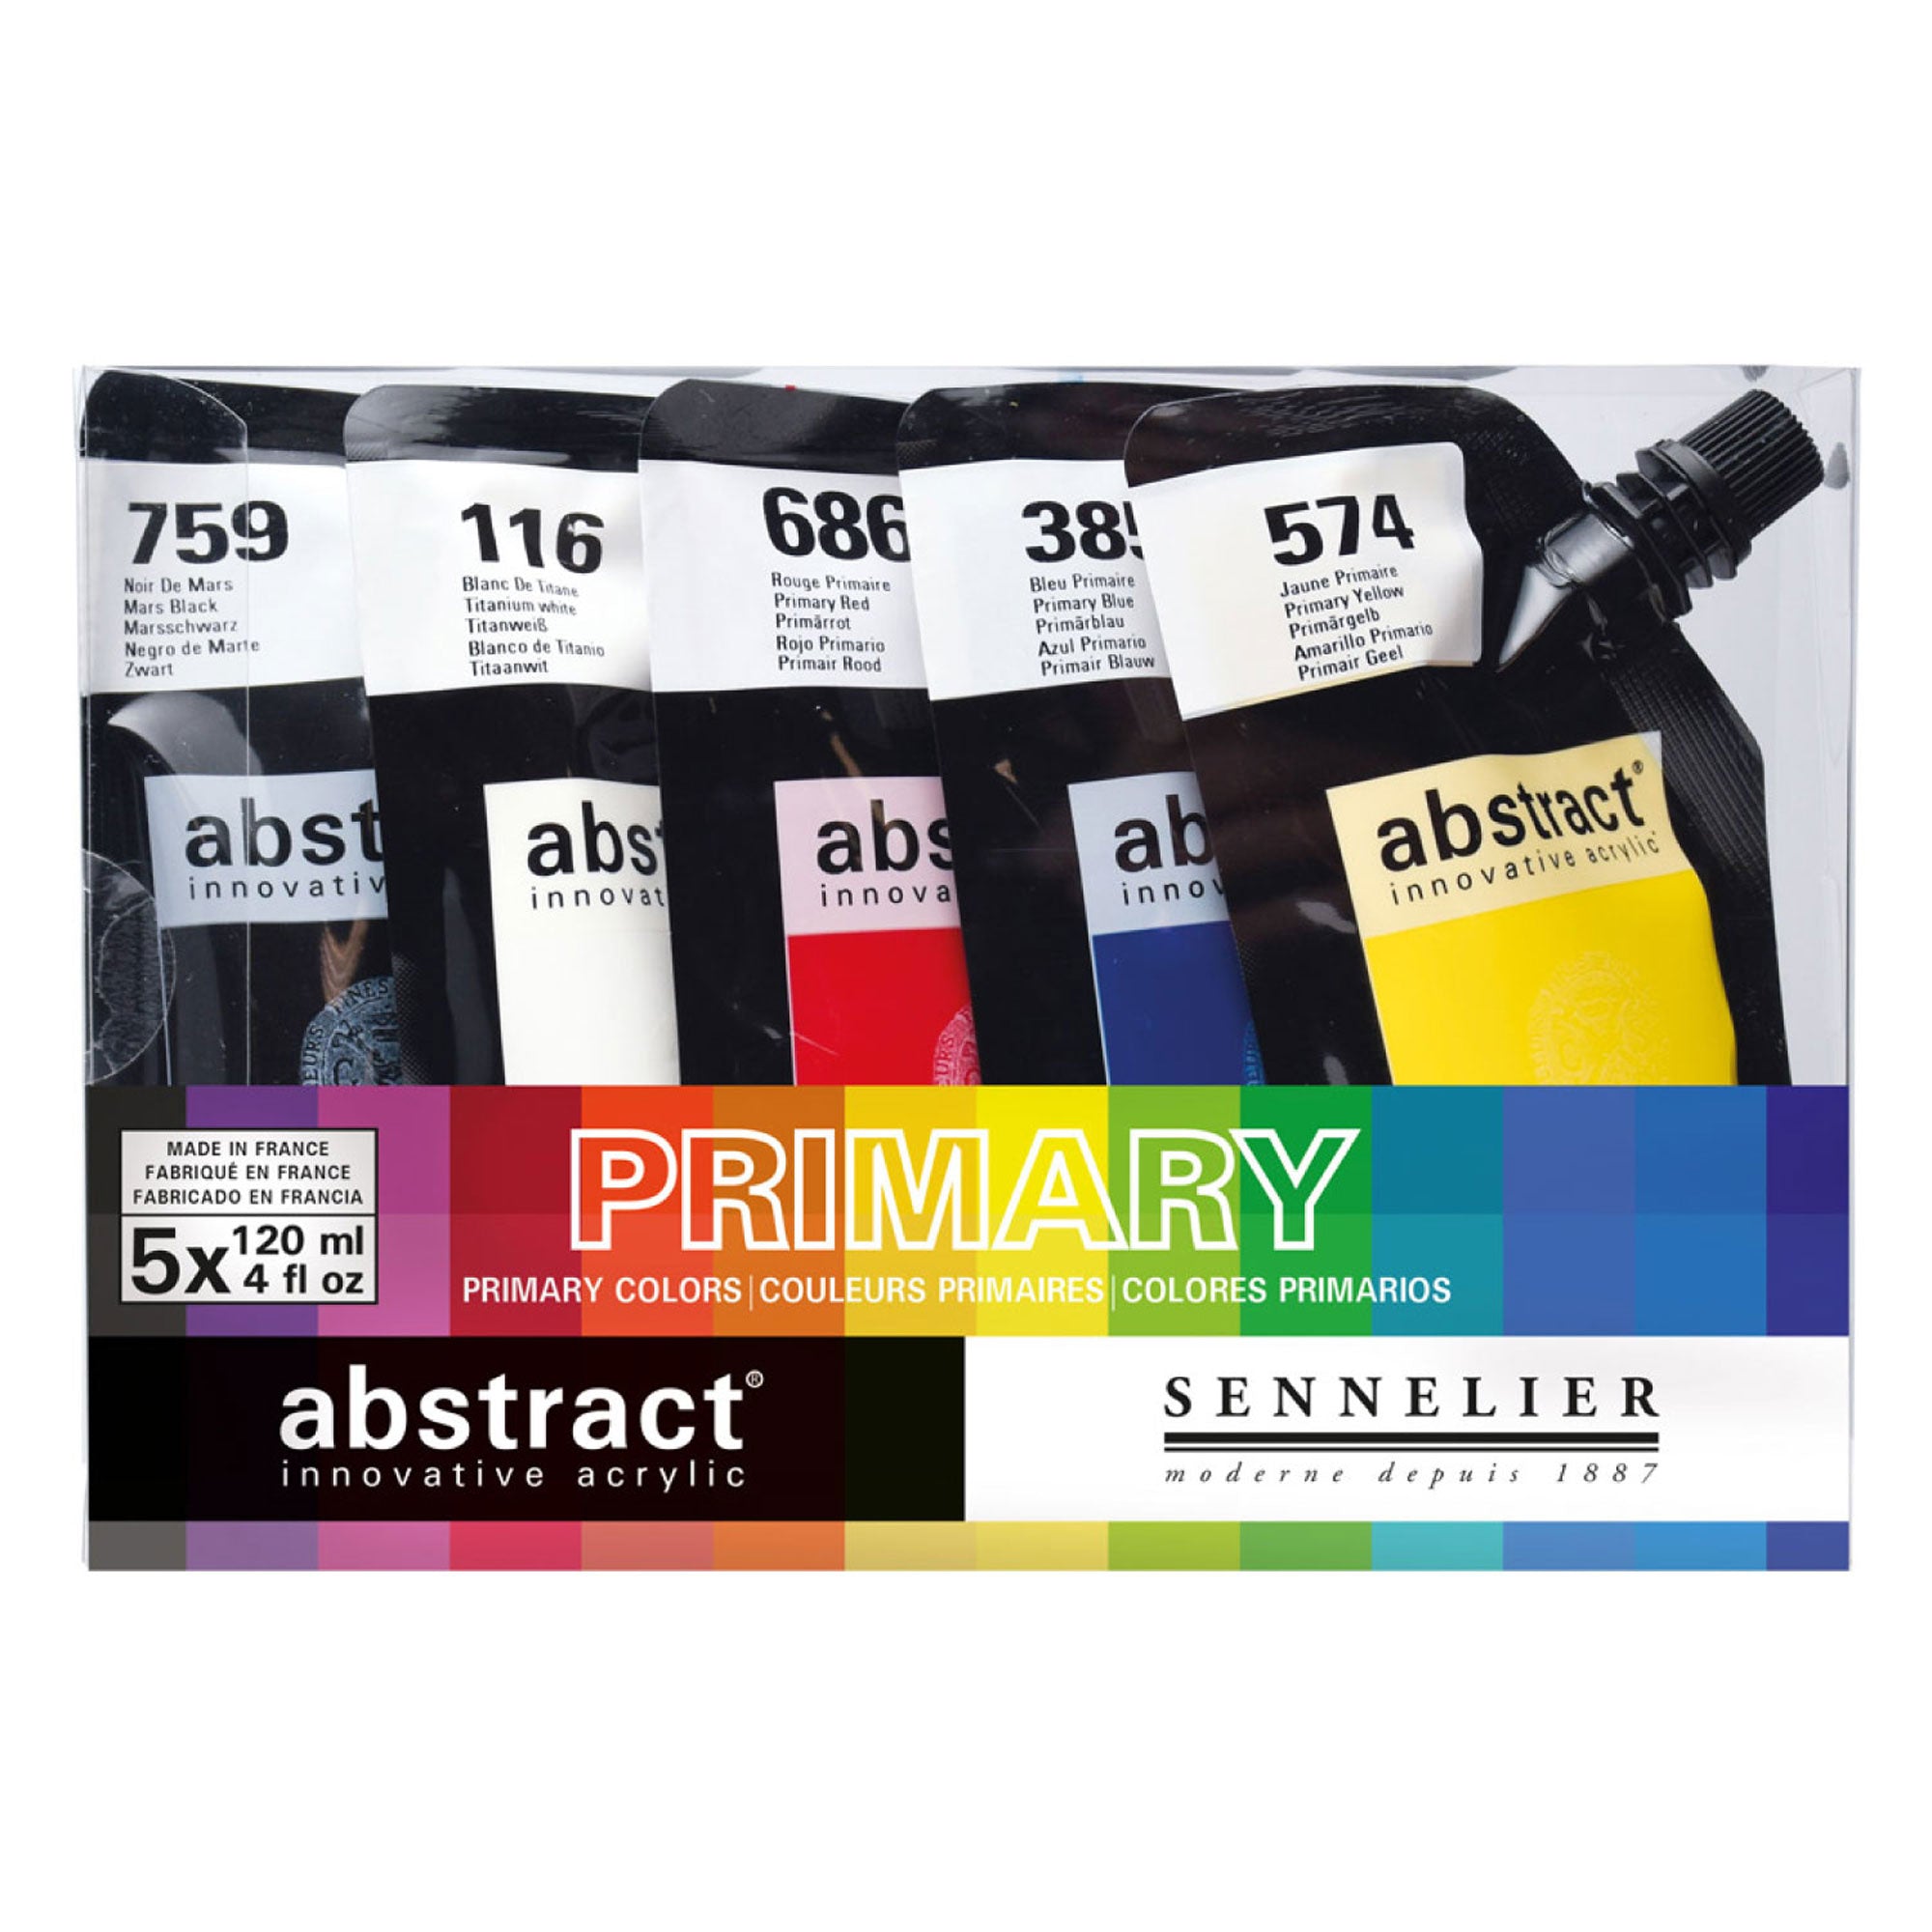 Sennelier Abstract Acrylic Paint Pouches - Primary Set 5 x 120ml